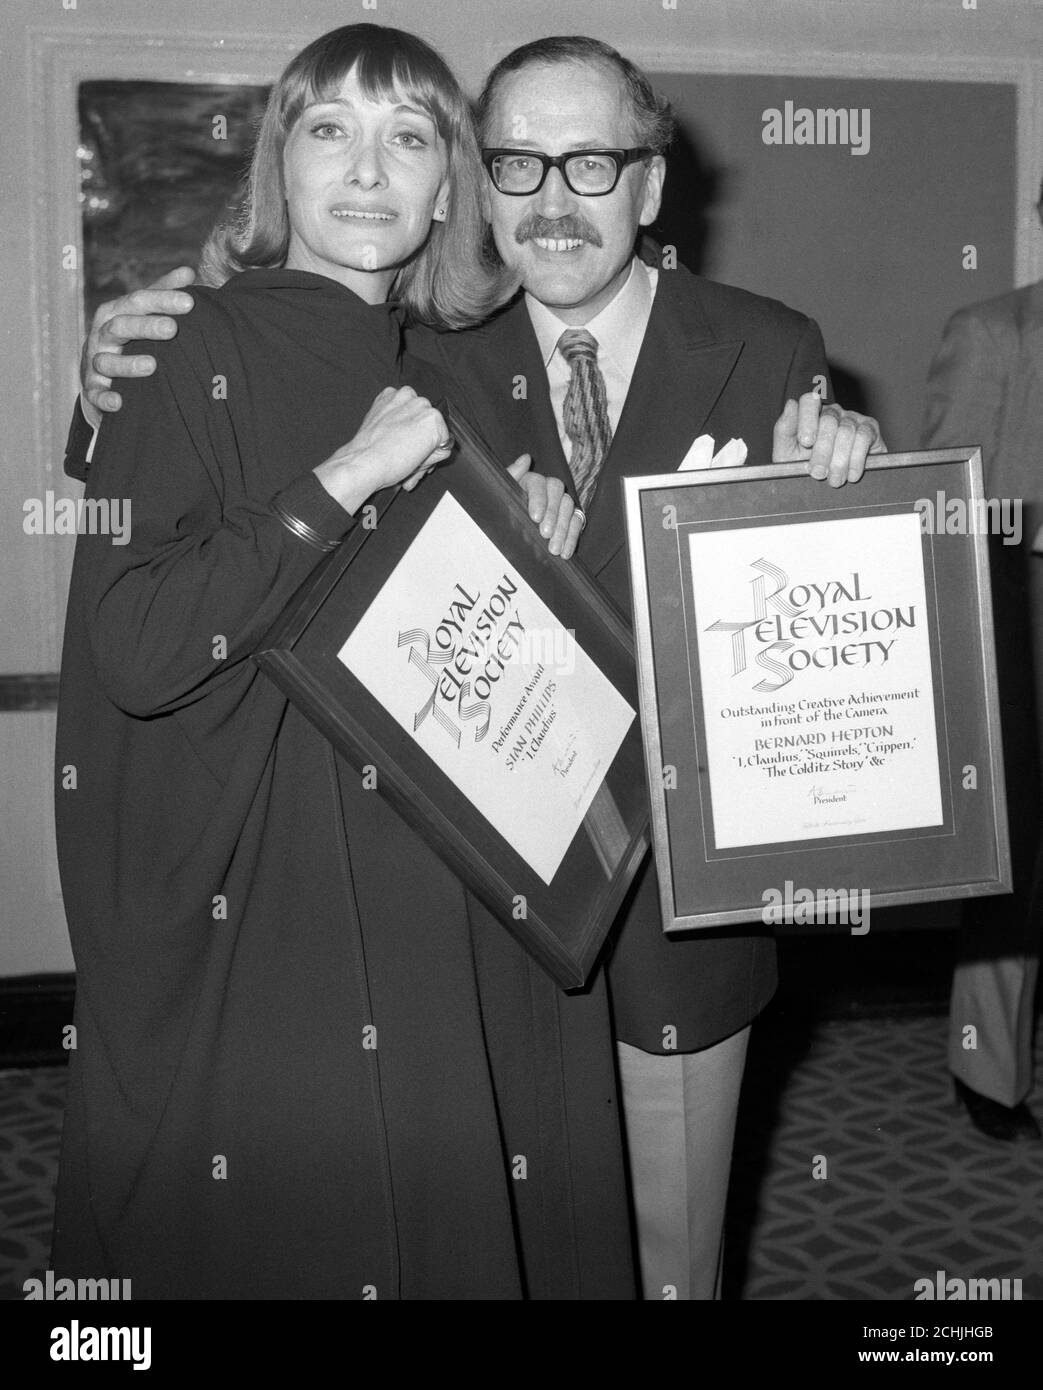 Actress Sian Phillips with actor Bernard Hepton at the Cafe Royal in London when they received awards at the Royal Television Society Programme Awards 1976/77 presentation ceremony. Sian won a Performance Award for her part in 'I, Claudius' and Bernard's award , for Outstanding Creative Achievement in front of the camera, was for his performances in 'I, Claudius', 'Squirrels', 'Crippen' and 'The Colditz Story'. Stock Photo